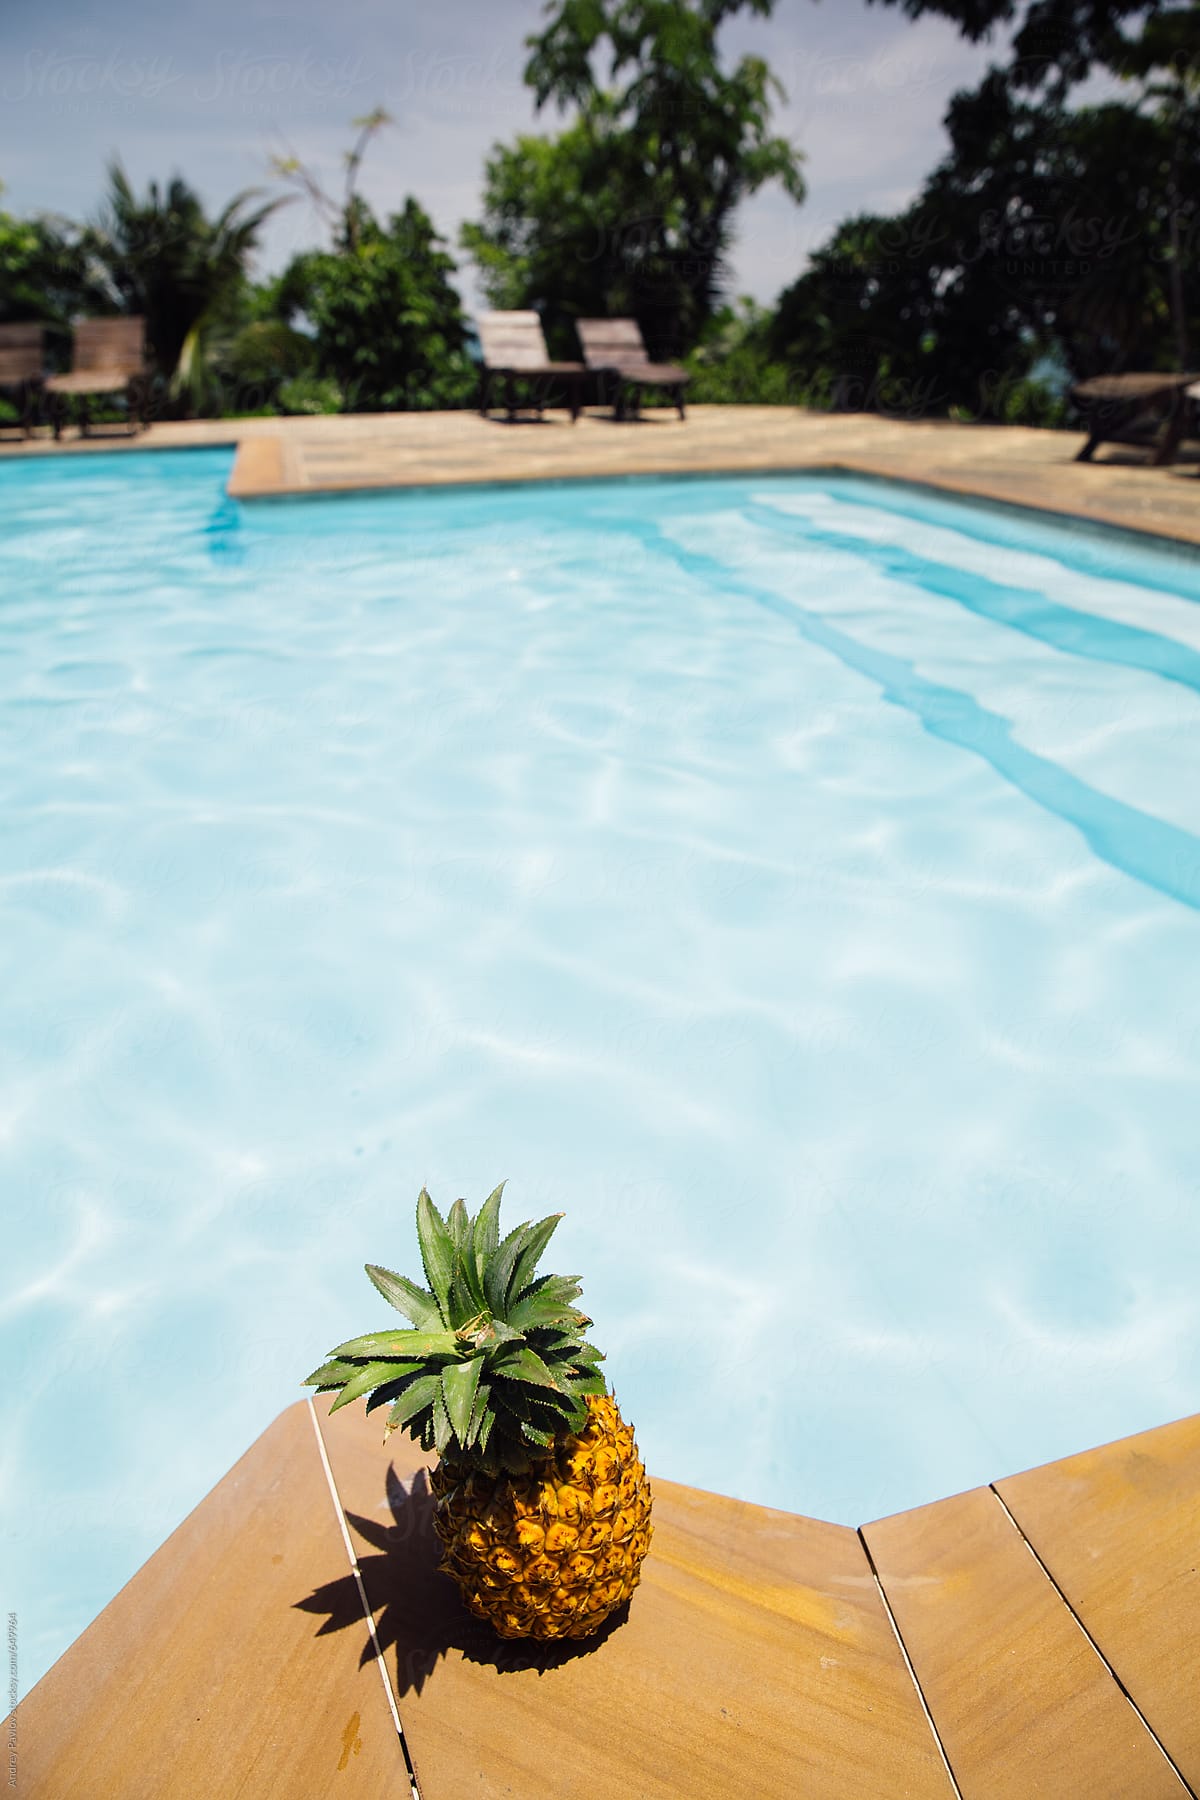 Pineapple on the edge of the pool